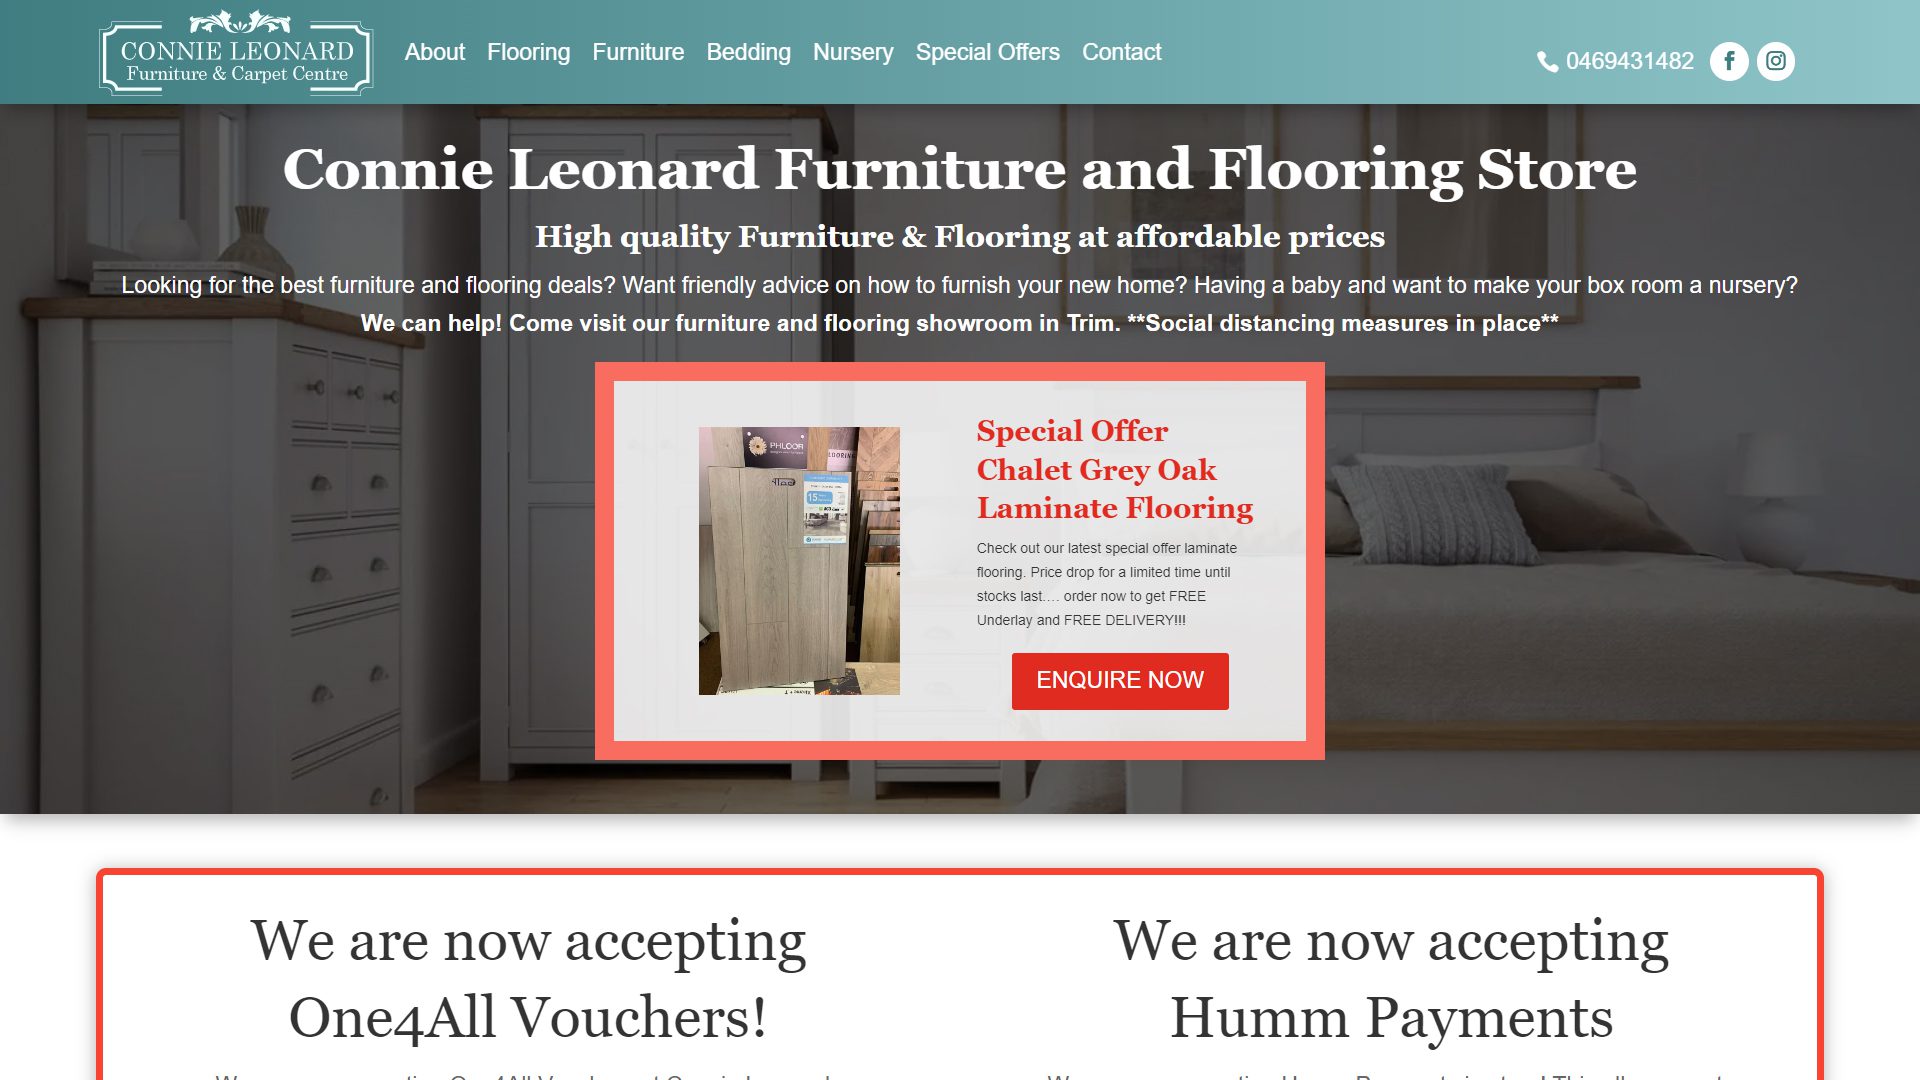 Connie Leonard Furniture and Flooring Store Above the Fold